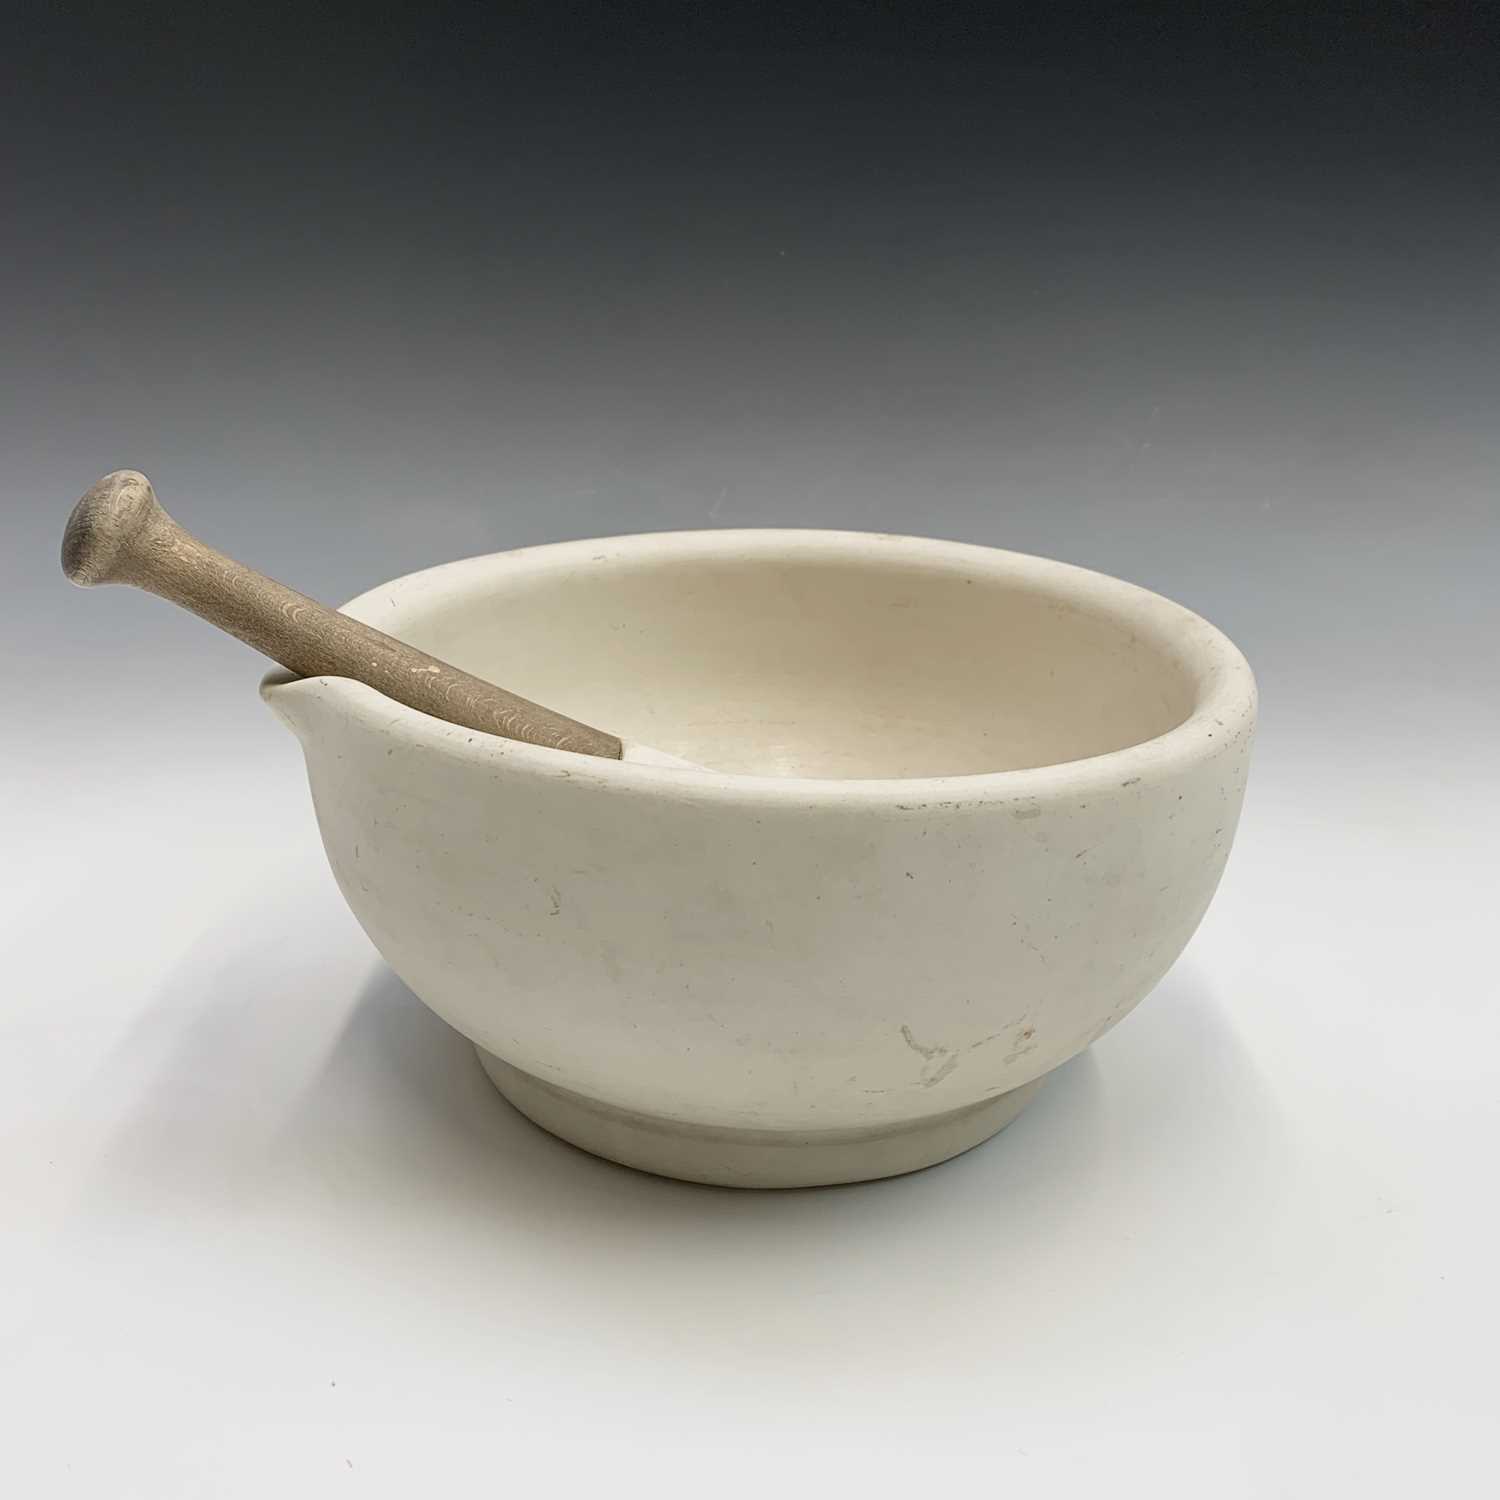 A pestle and mortar. Height of mortar 11cm, length of pestle 22.5cm. - Image 6 of 6